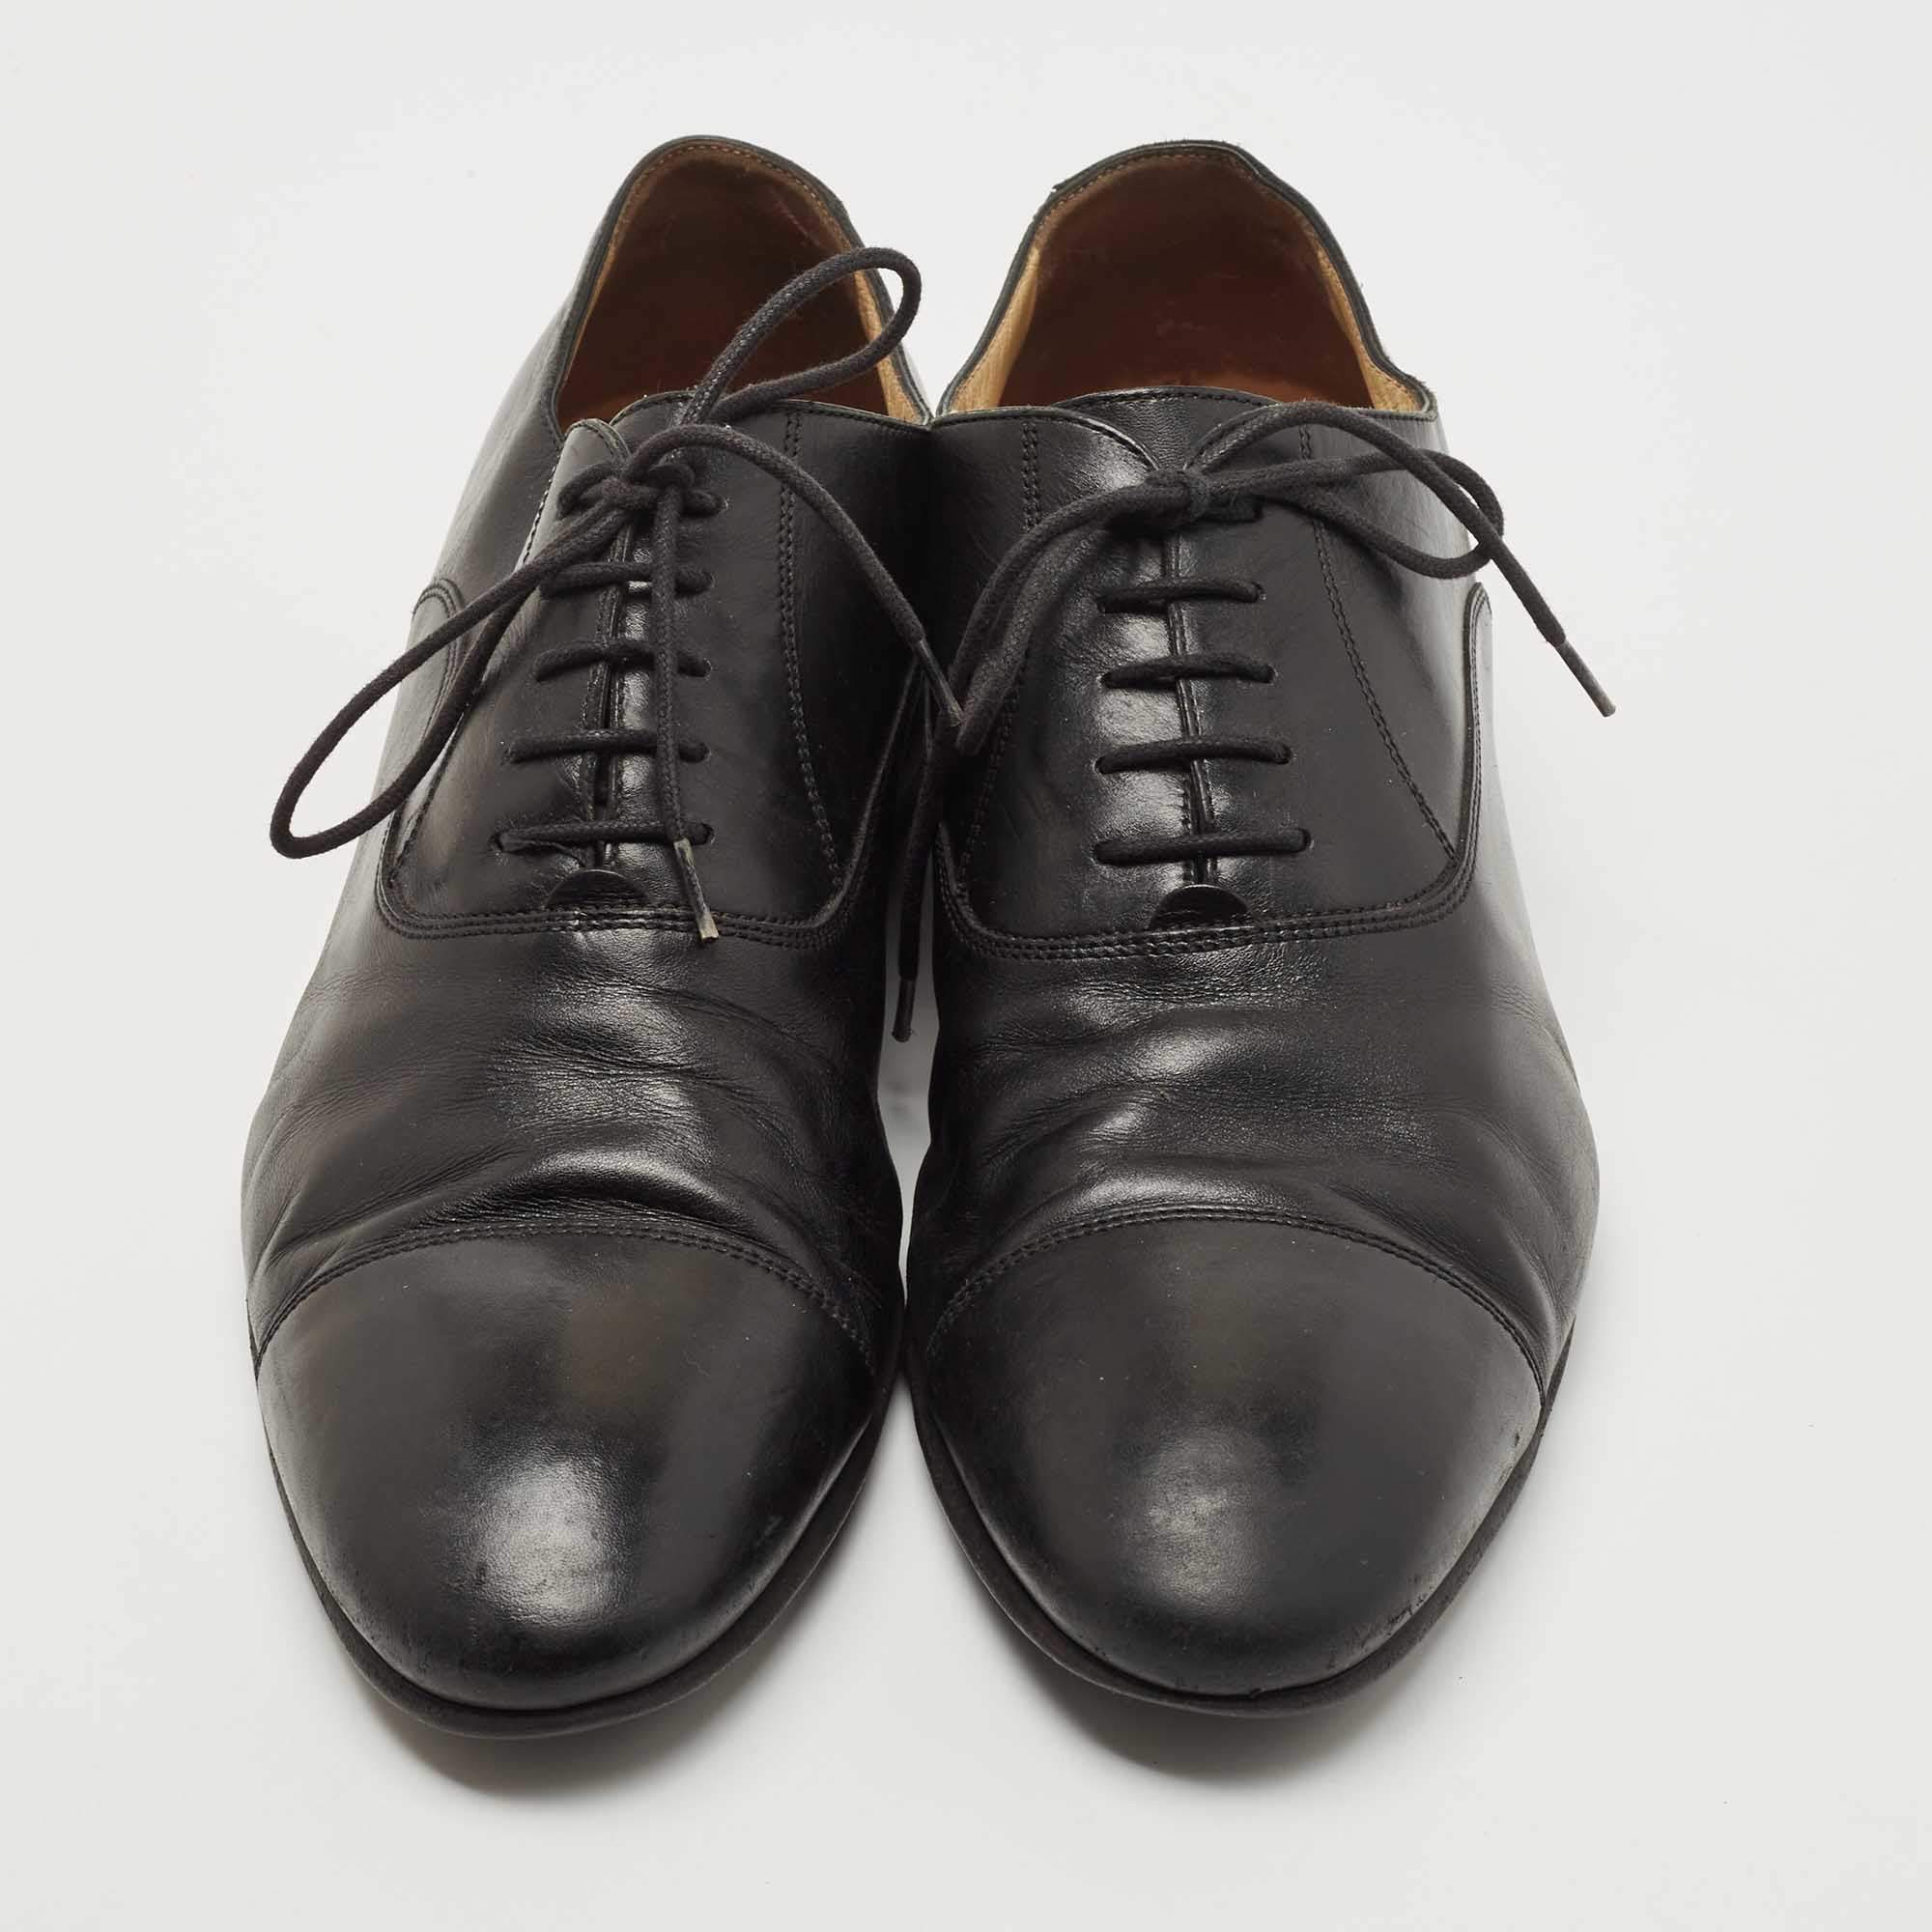 Chanel Black Leather Lace Up Oxfords Size 44 Chanel